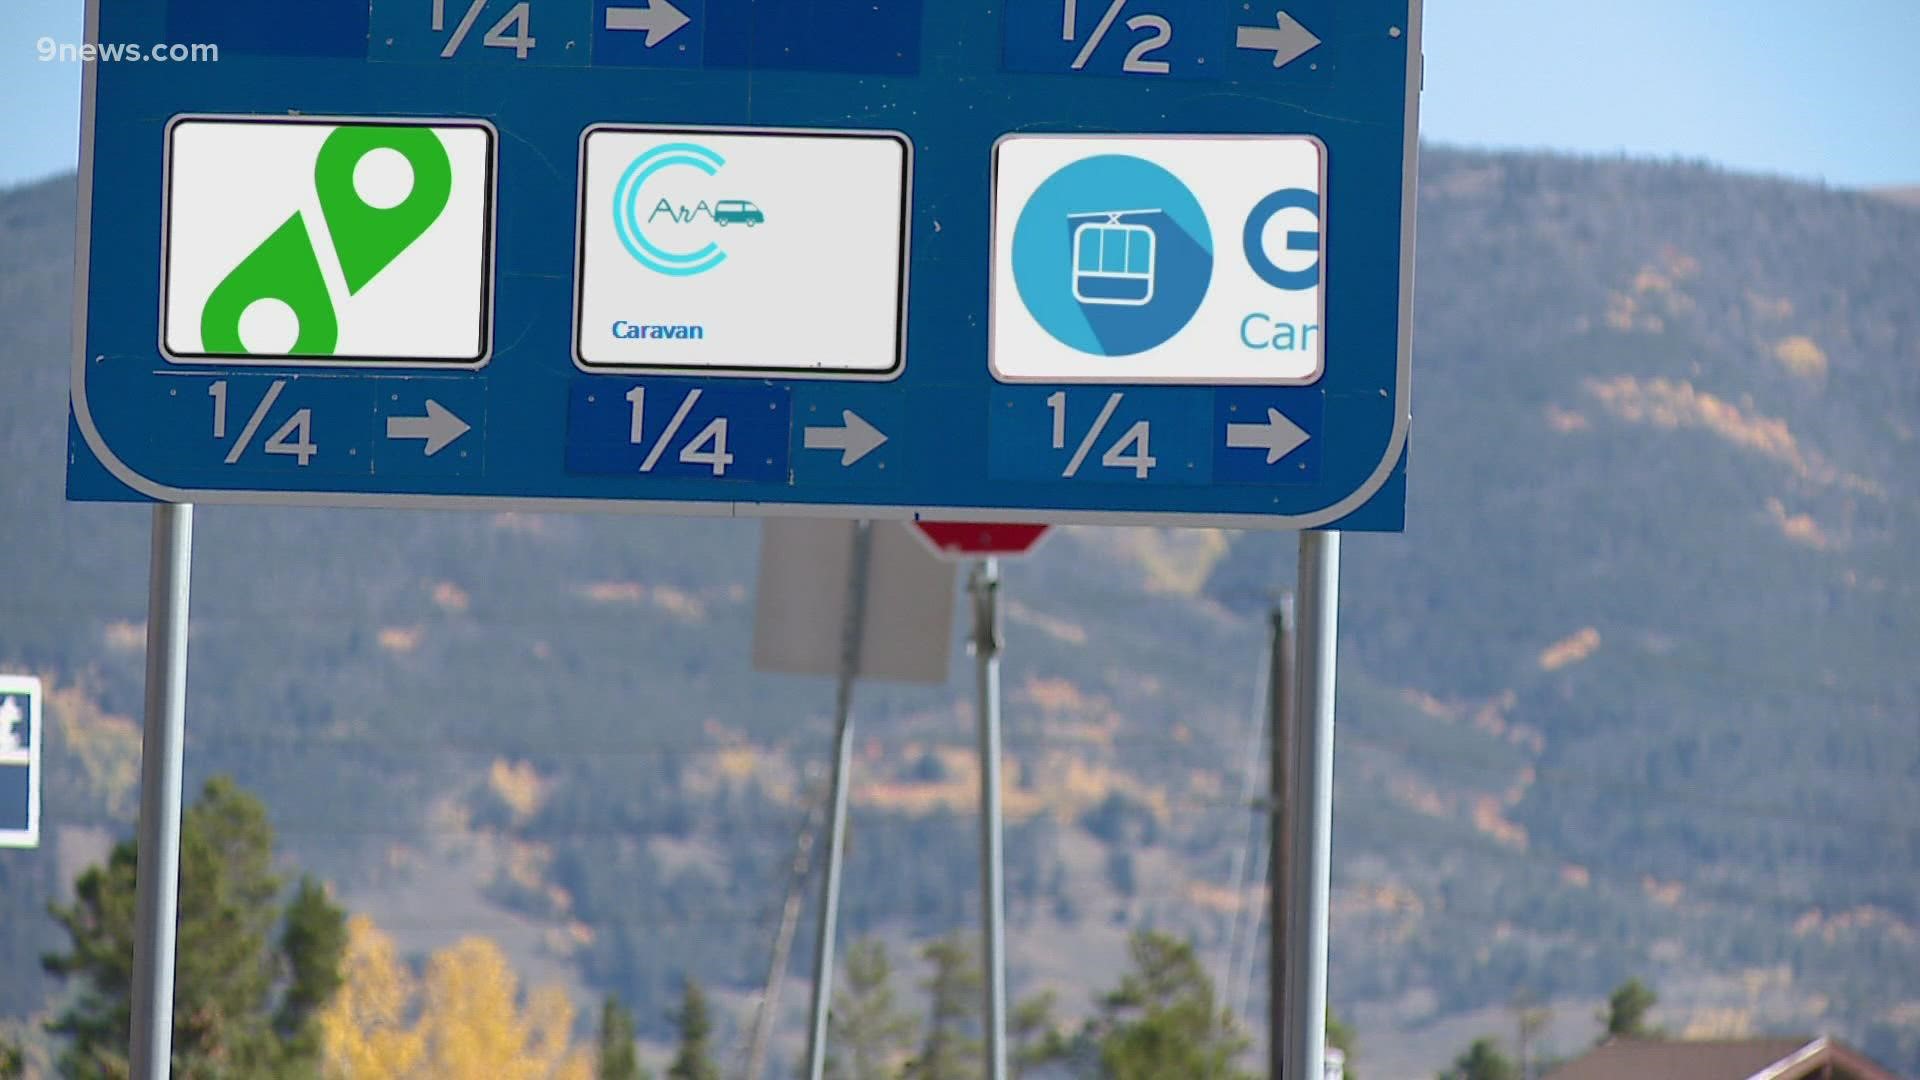 Several new carpooling apps designed to reduce congestion along Interstate 70 are getting ready to launch in Colorado.